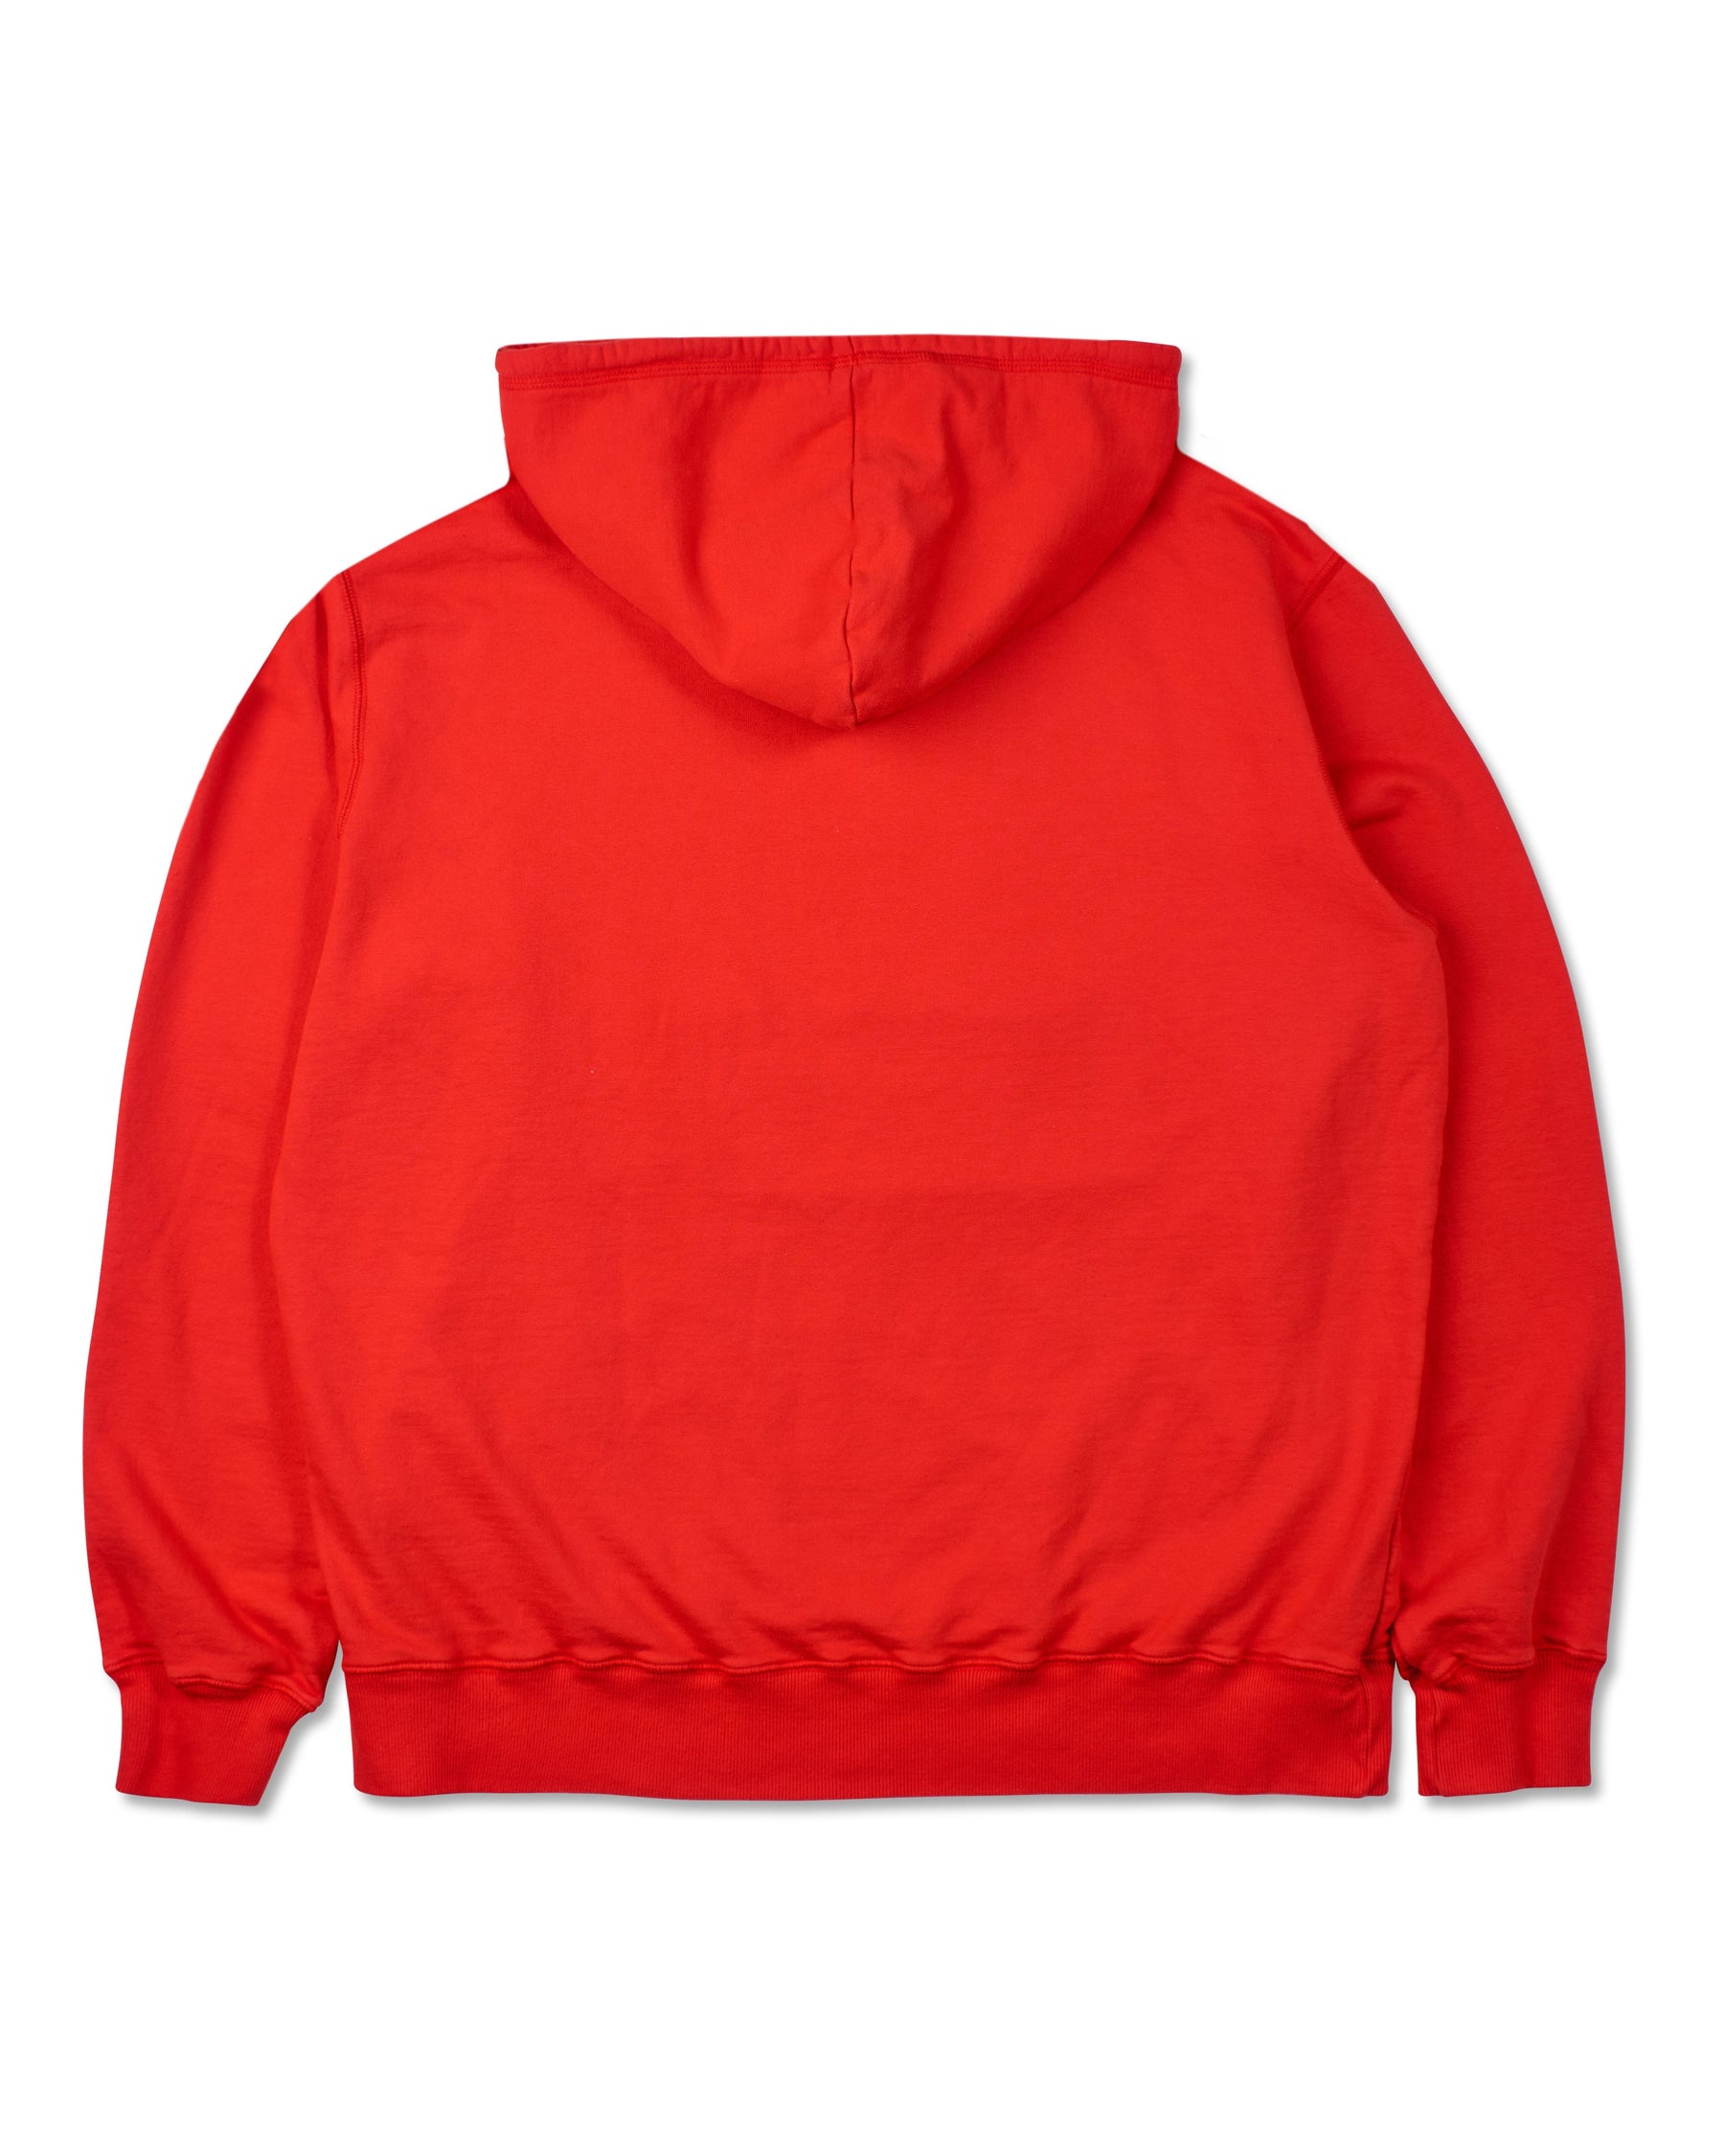 Jeff Hamilton Red Patch Hoodie